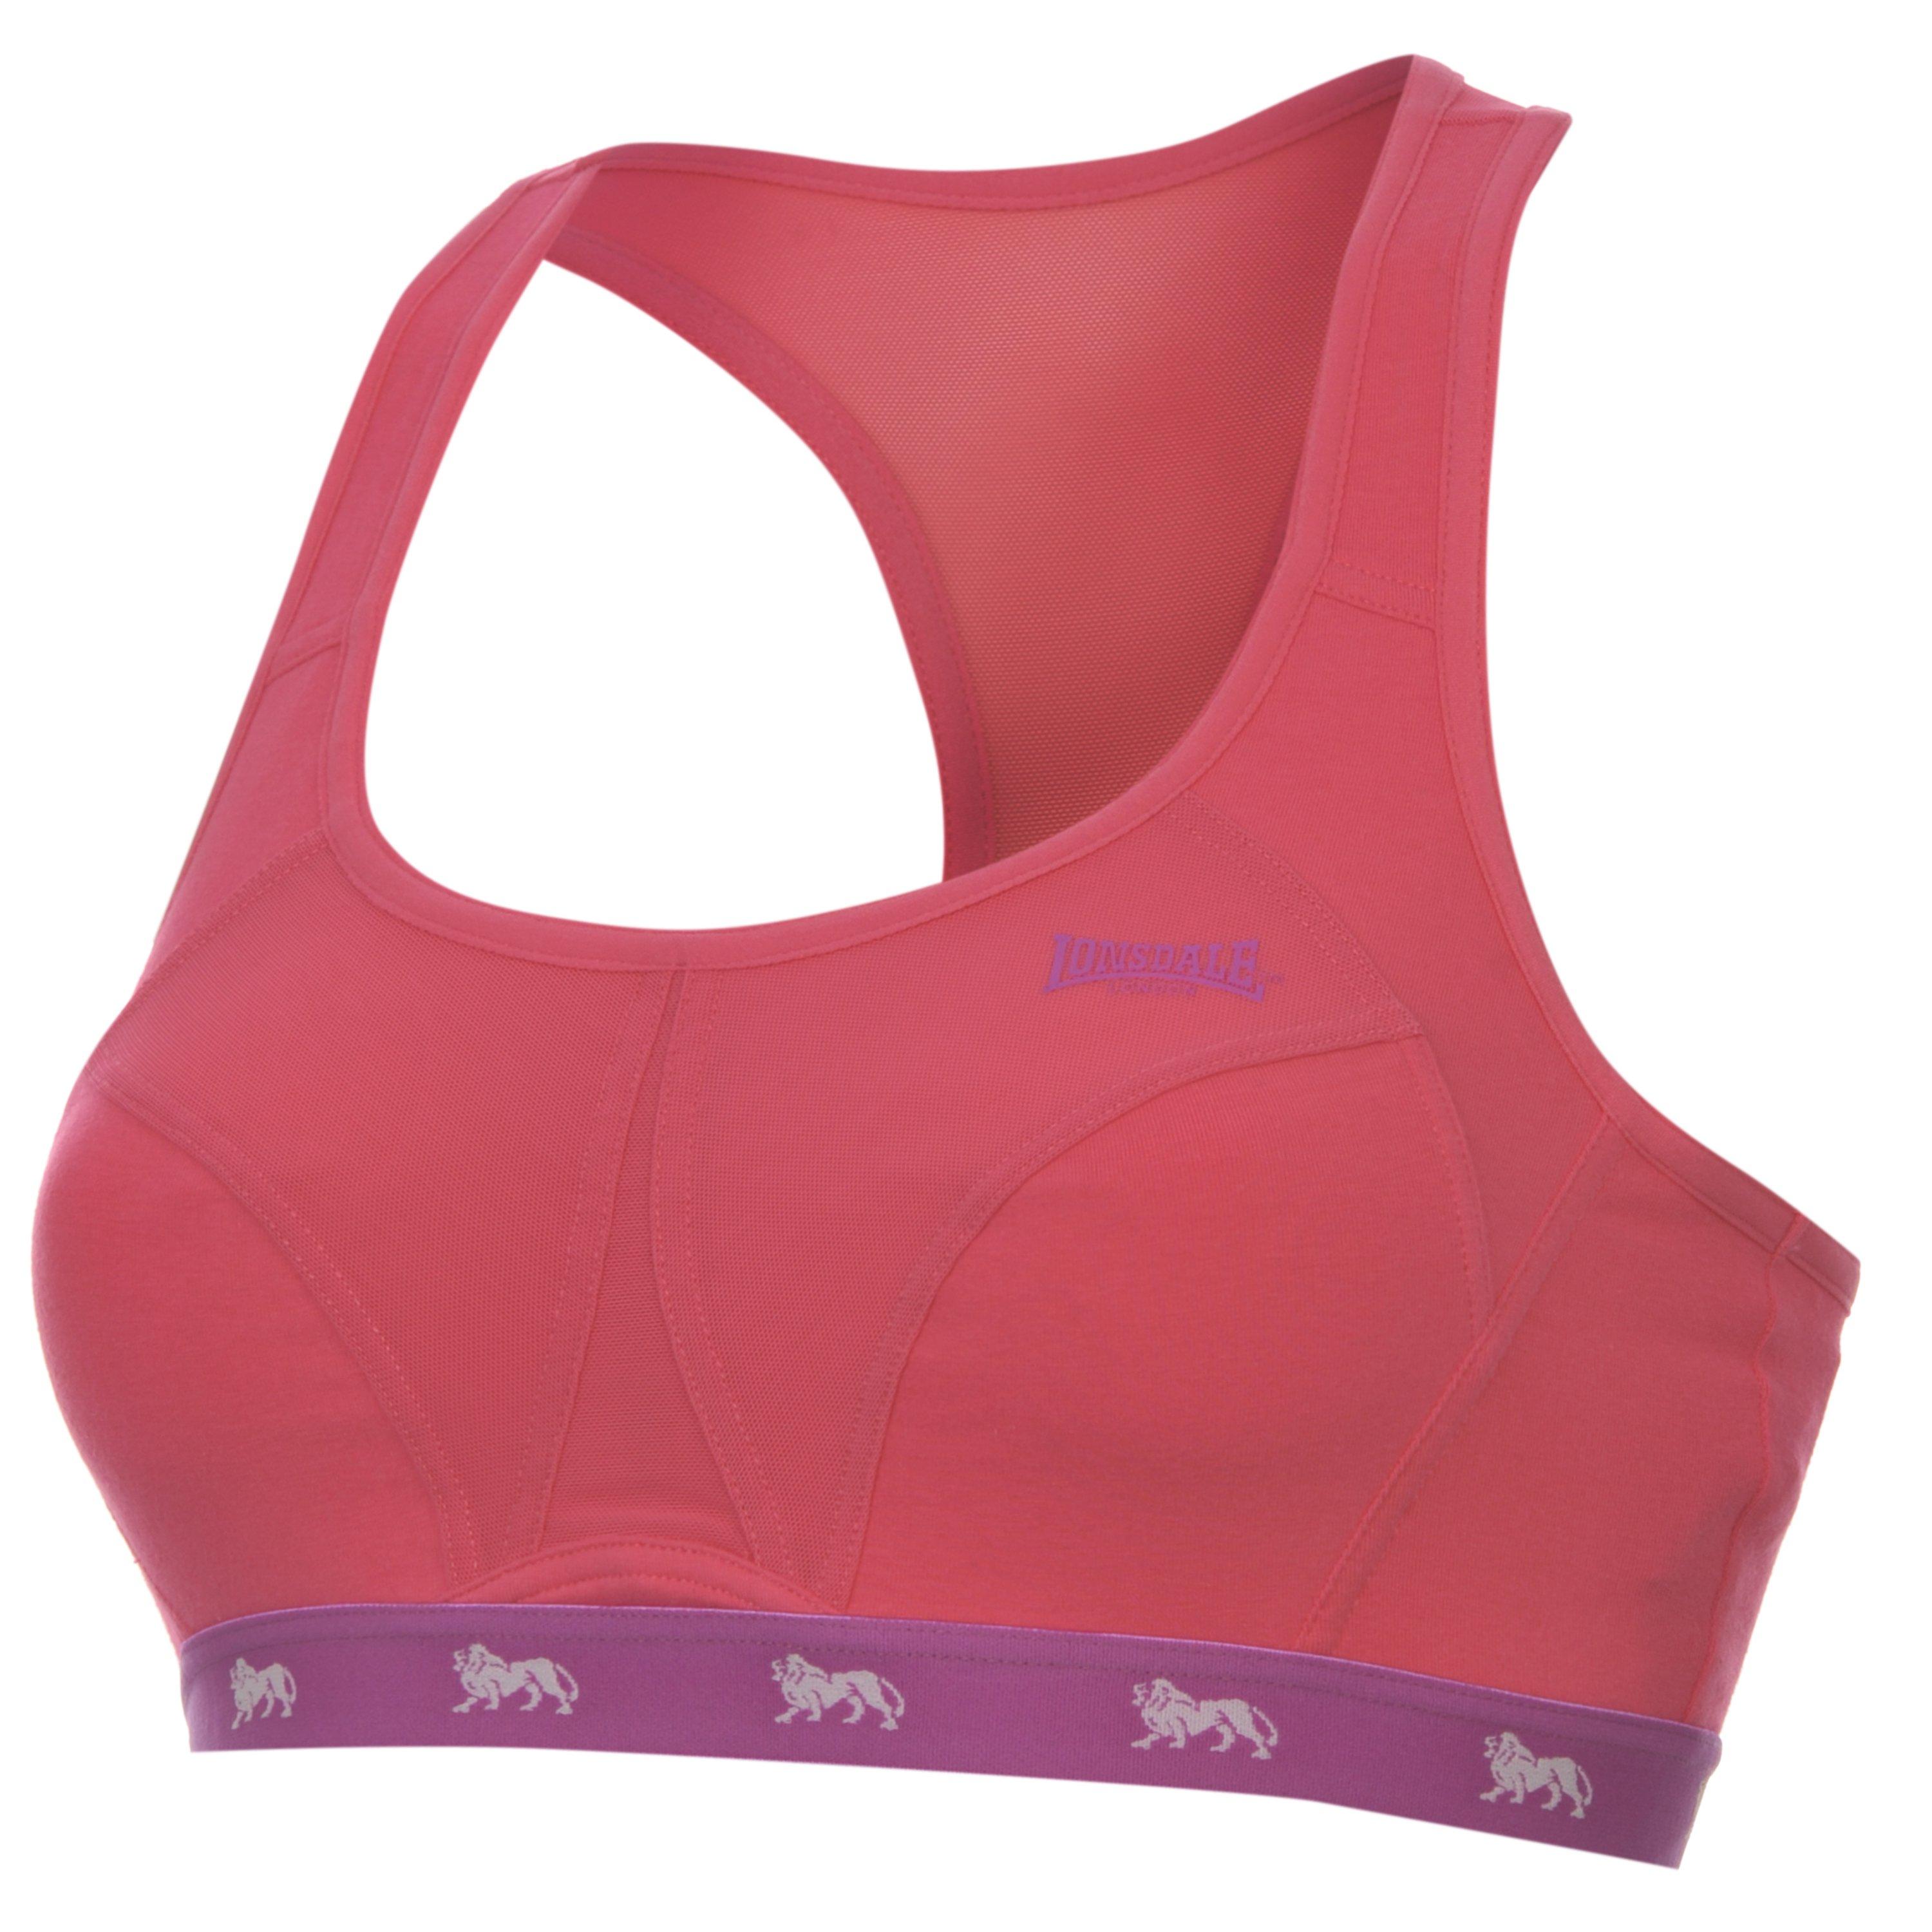 Lonsdale Sports Bra (34C), Women's Fashion, Activewear on Carousell